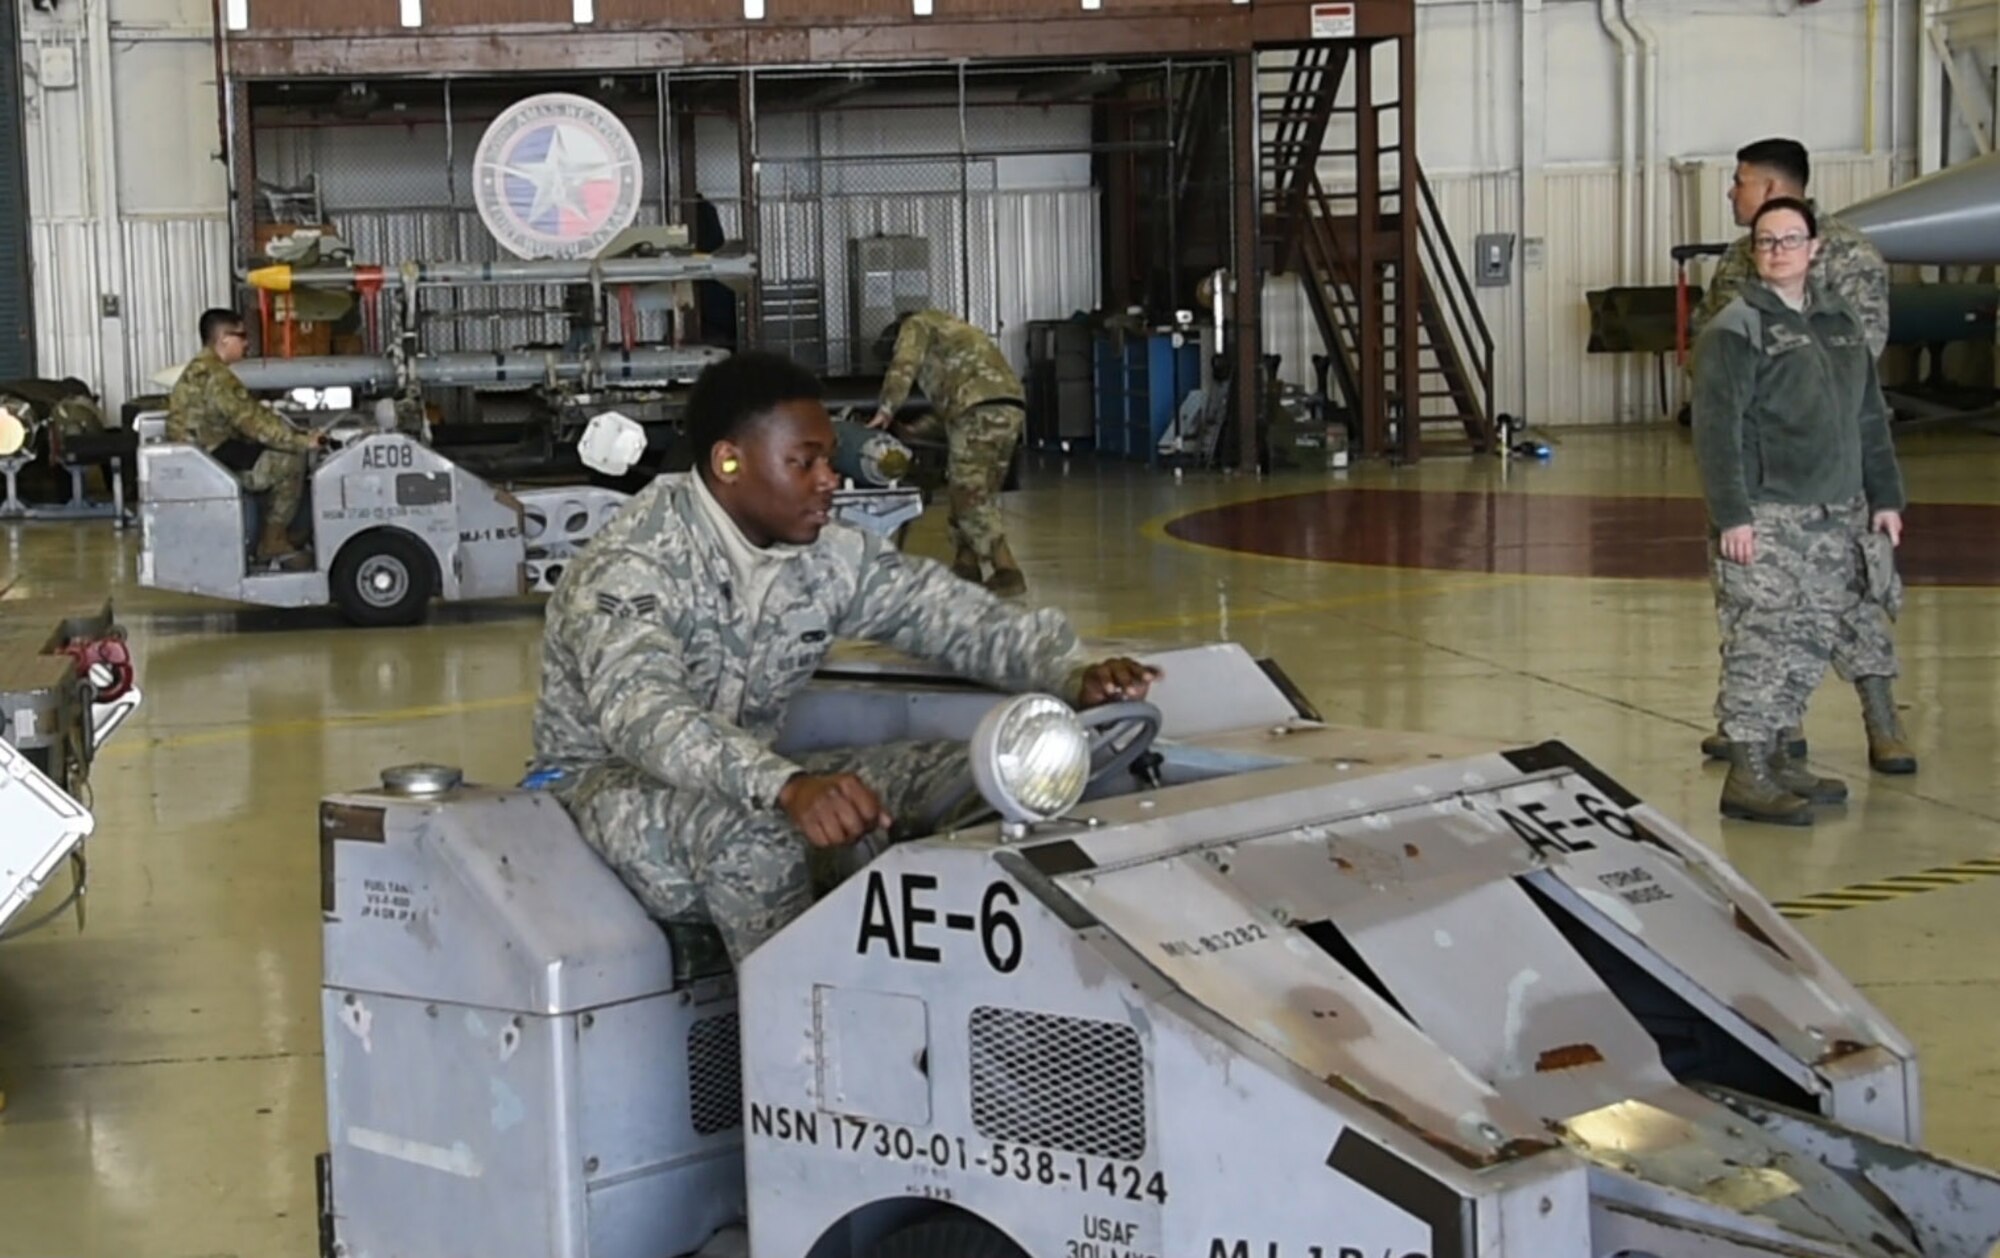 Senior Airman Justin Tillis, 301st Fighter Wing Maintenance Squadron three man, drives a jammer during the weapons loading competition at U.S. Naval Air Station Joint Reserve Base Fort Worth, Texas on Jan. 12, 2020. A Jammer is a vehicle used to transport and load munitions onto aircrafts. (U.S. Air Force photo by Tech. Sgt. Charles Taylor)